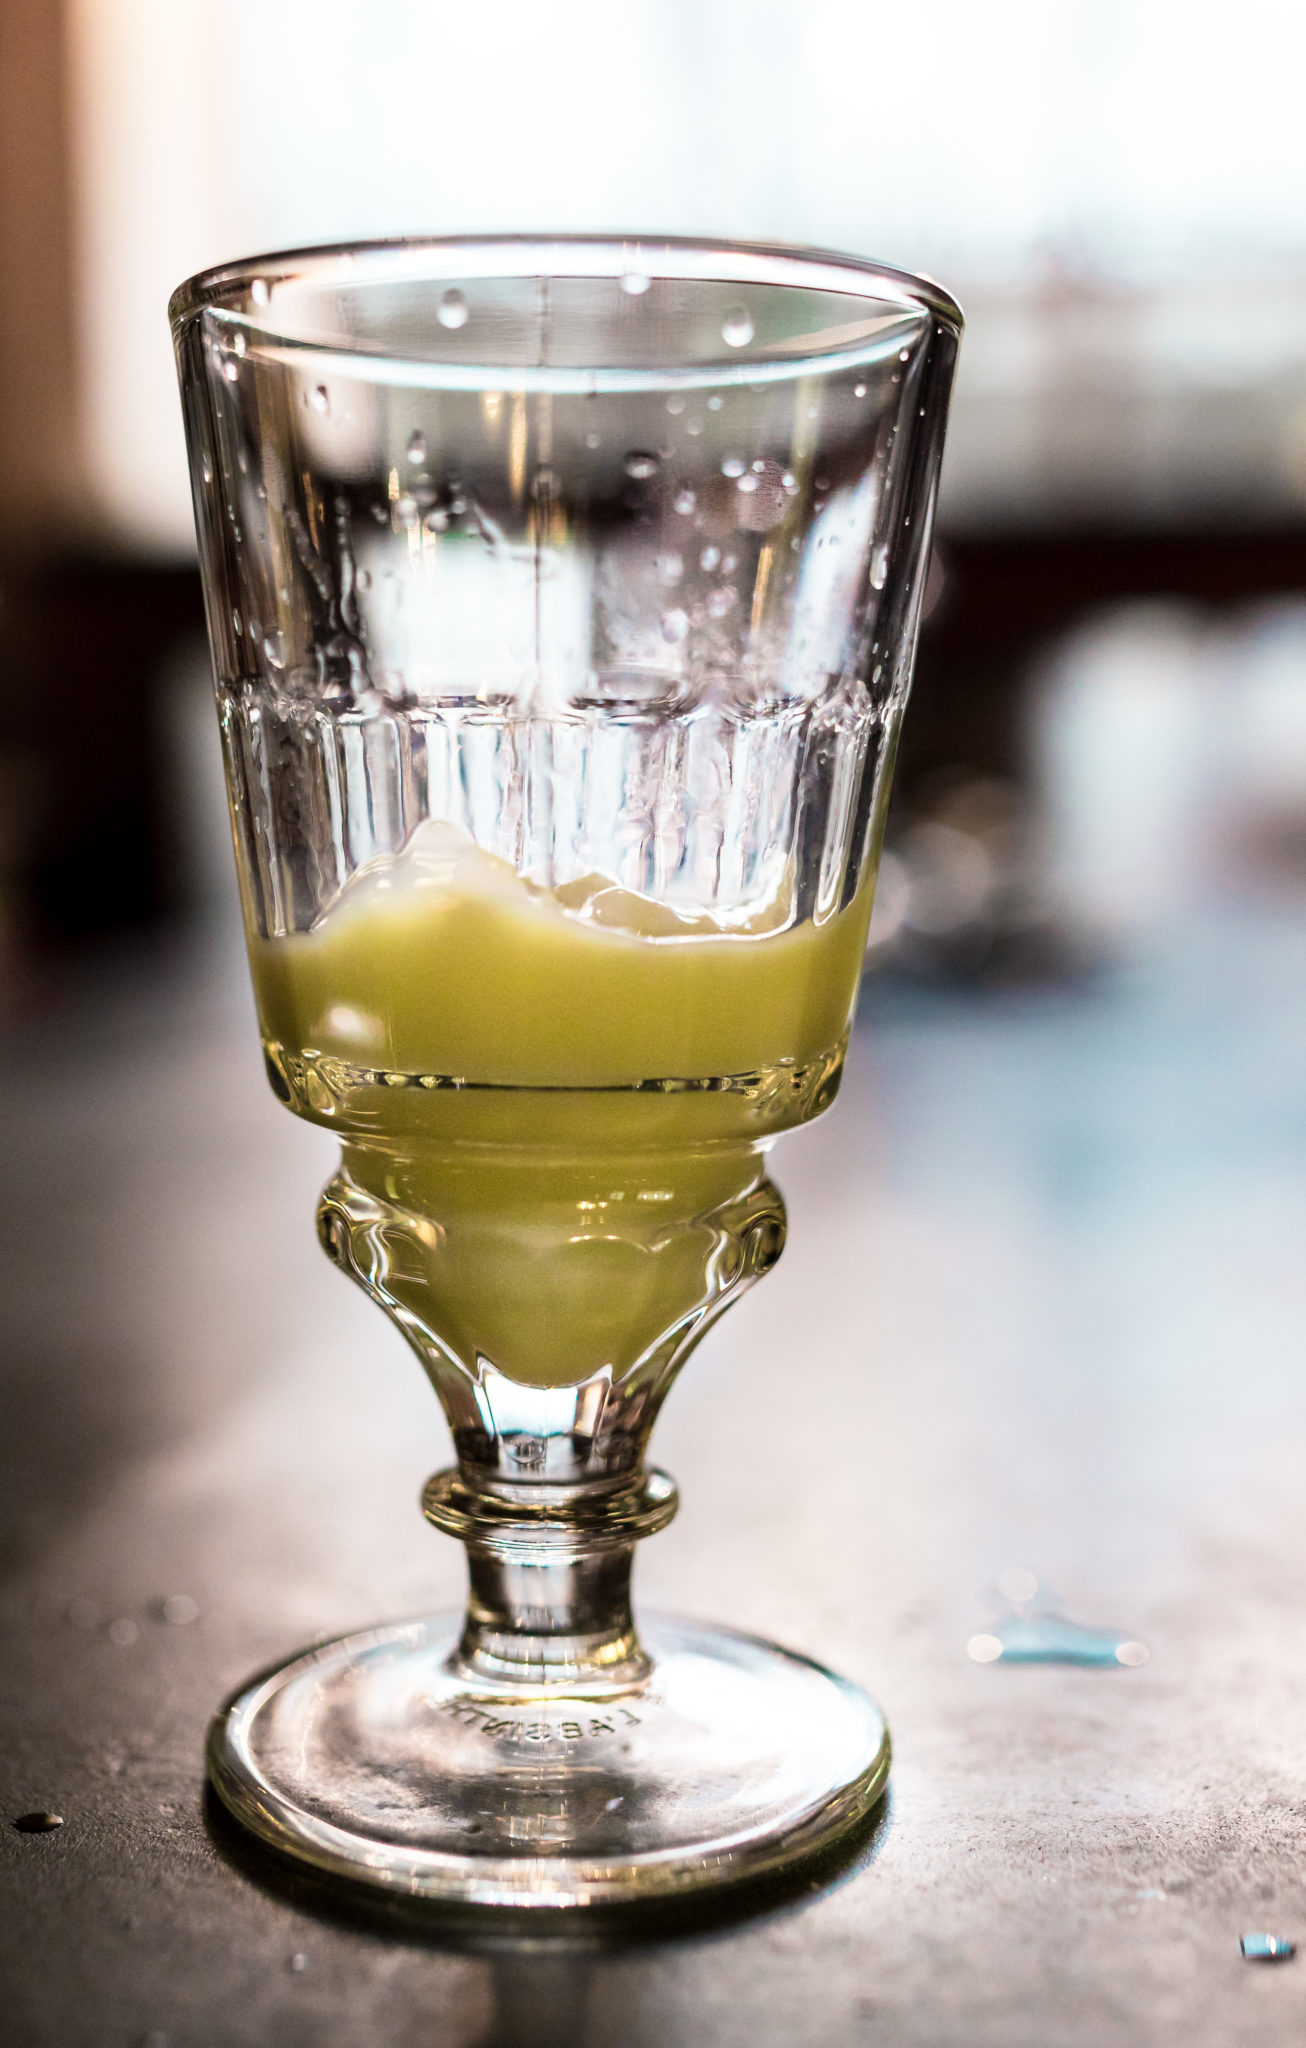 All About Absinthe - 10 facts and myths about this famous green cocktail fairy. Learn about the history, art, the effects of absinthe and if using a spoon is necessary! #absinthe #drinks #fairy | pickledplum.com